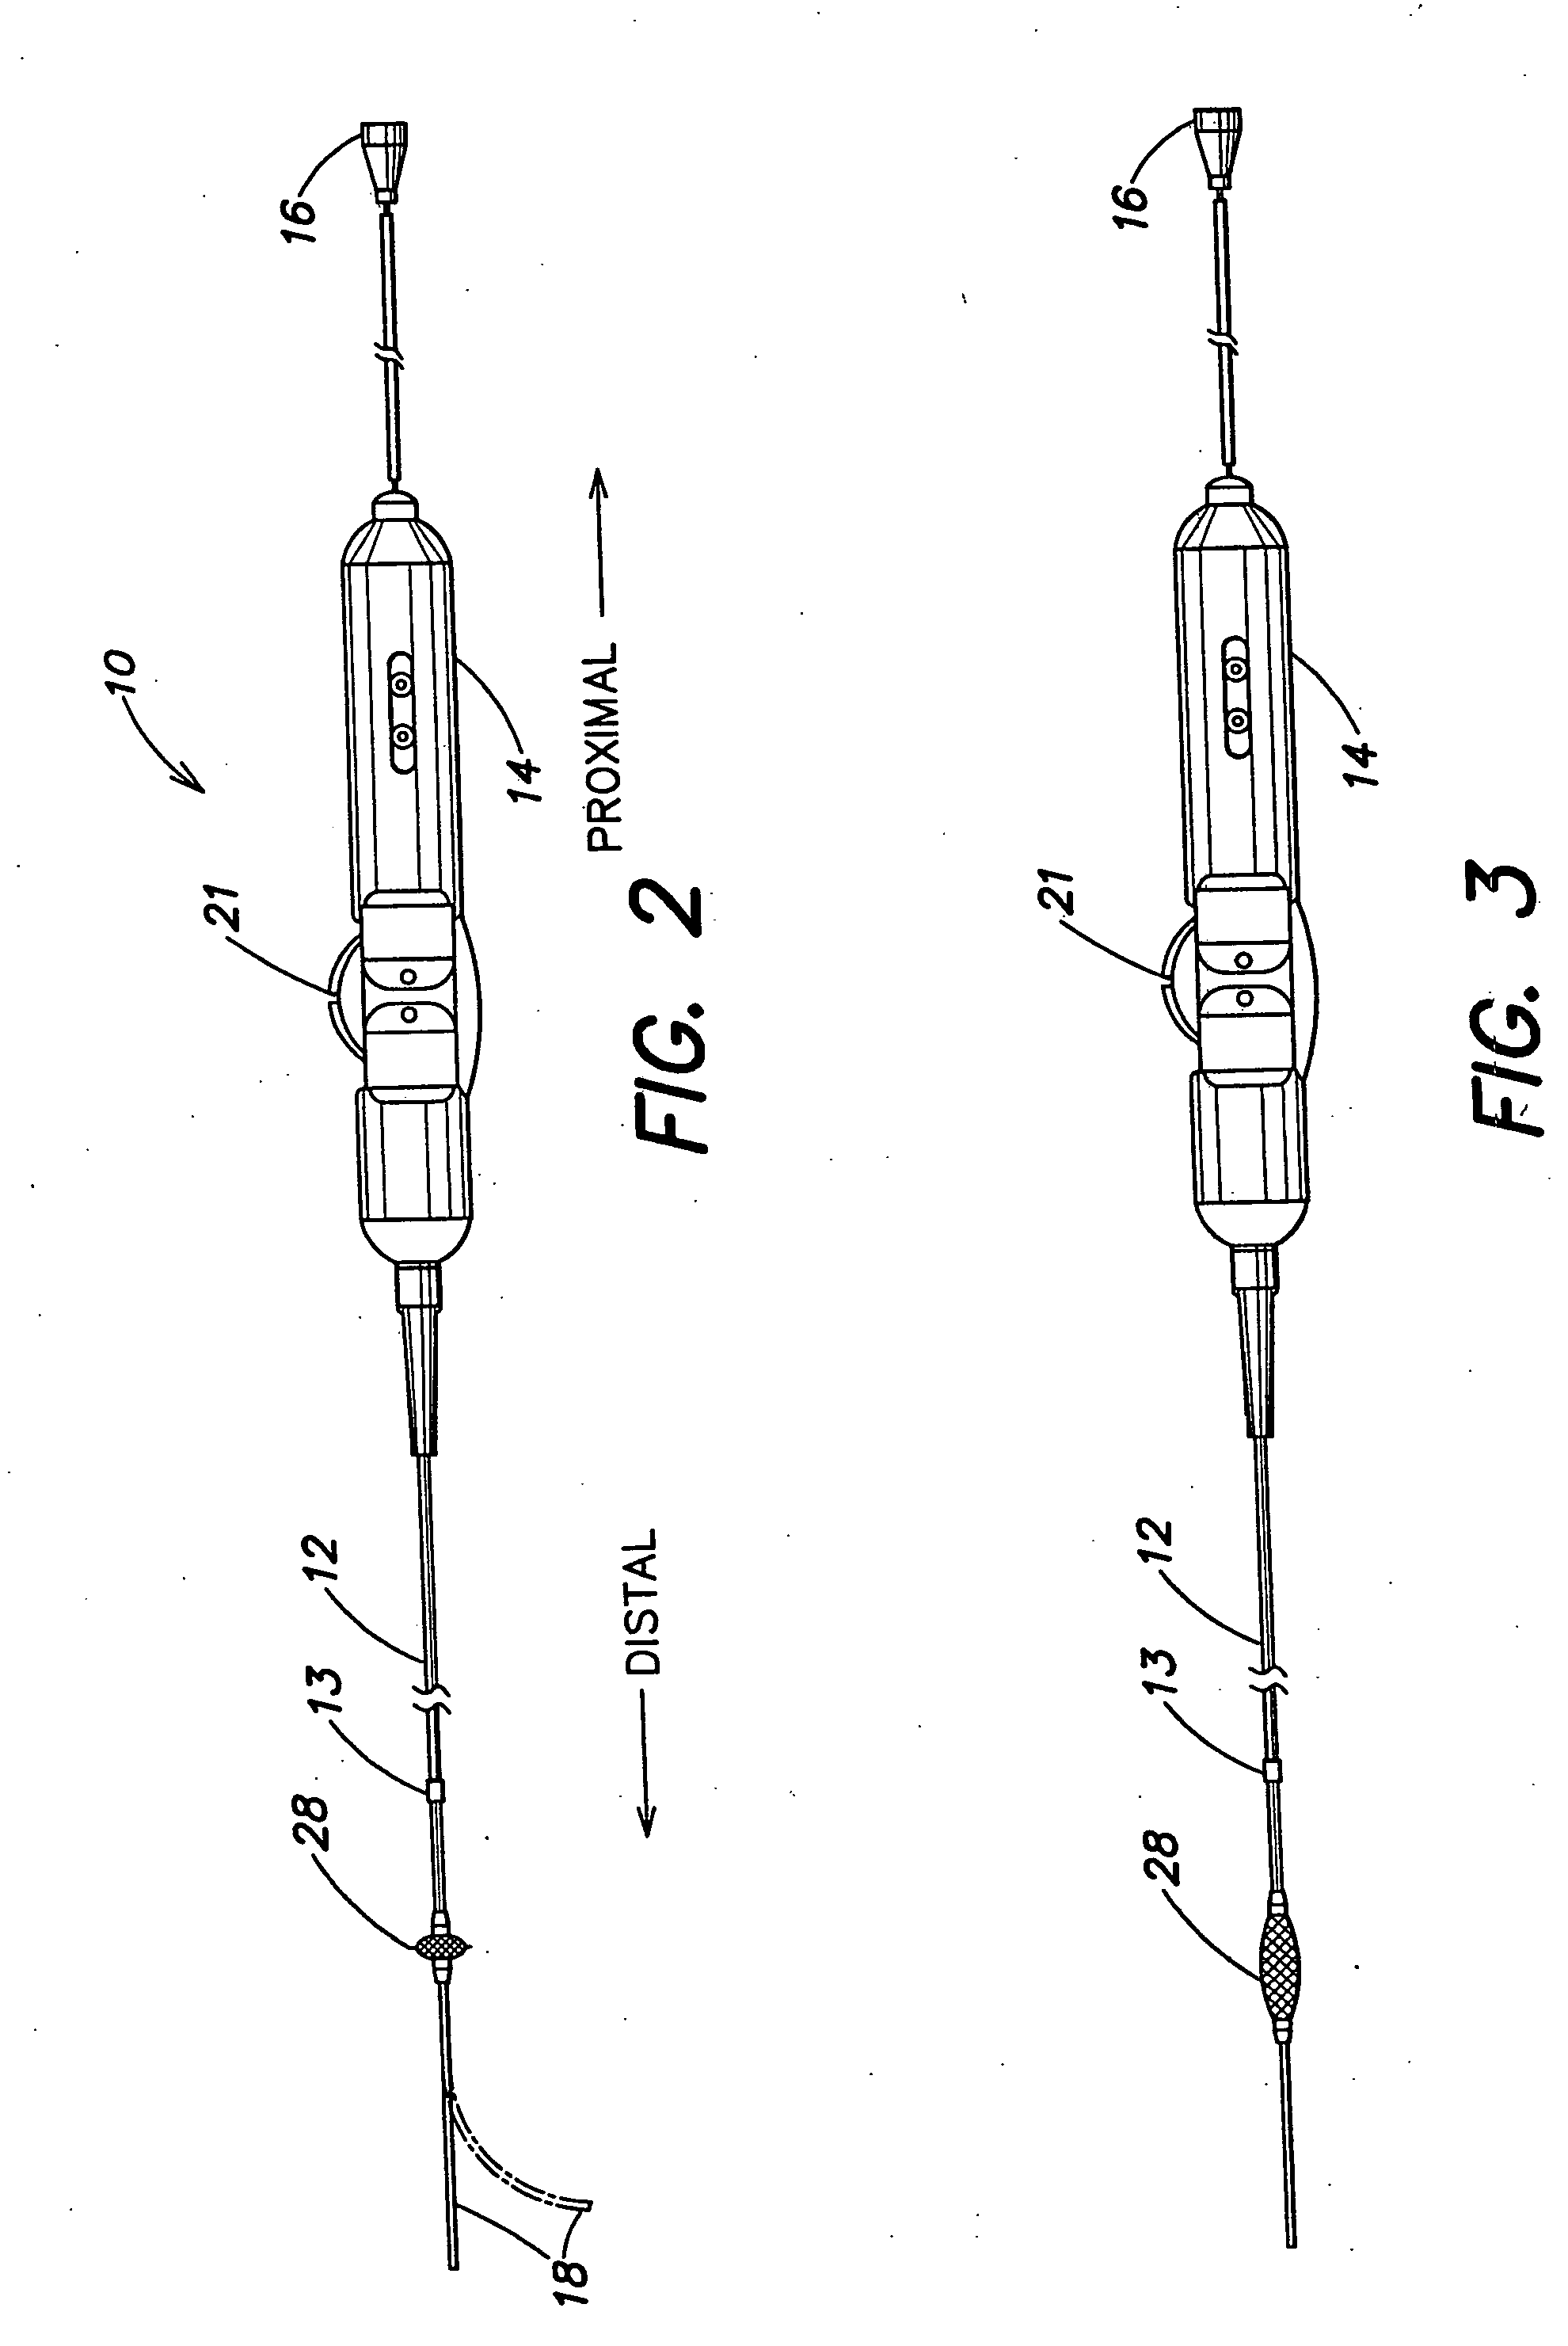 Apparatus and methods for mapping and ablation in electrophysiology procedures